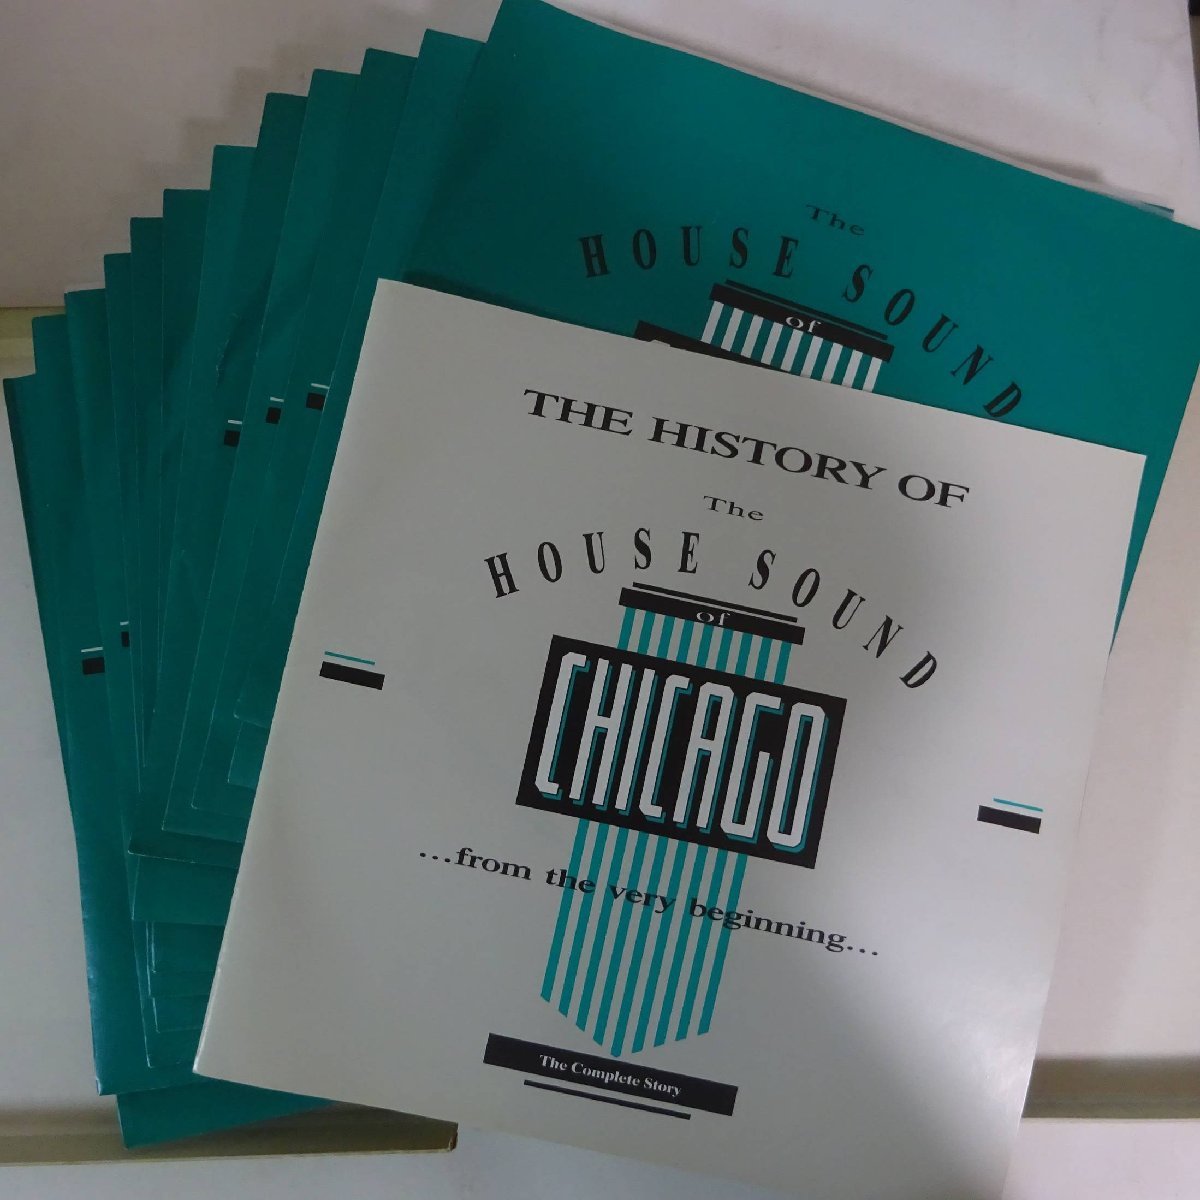 14025486;【Europe盤/12LP/BOX/限定プレス】V.A. / The History Of The House Sound Of Chicago (...From The Very Beginning...)_画像2